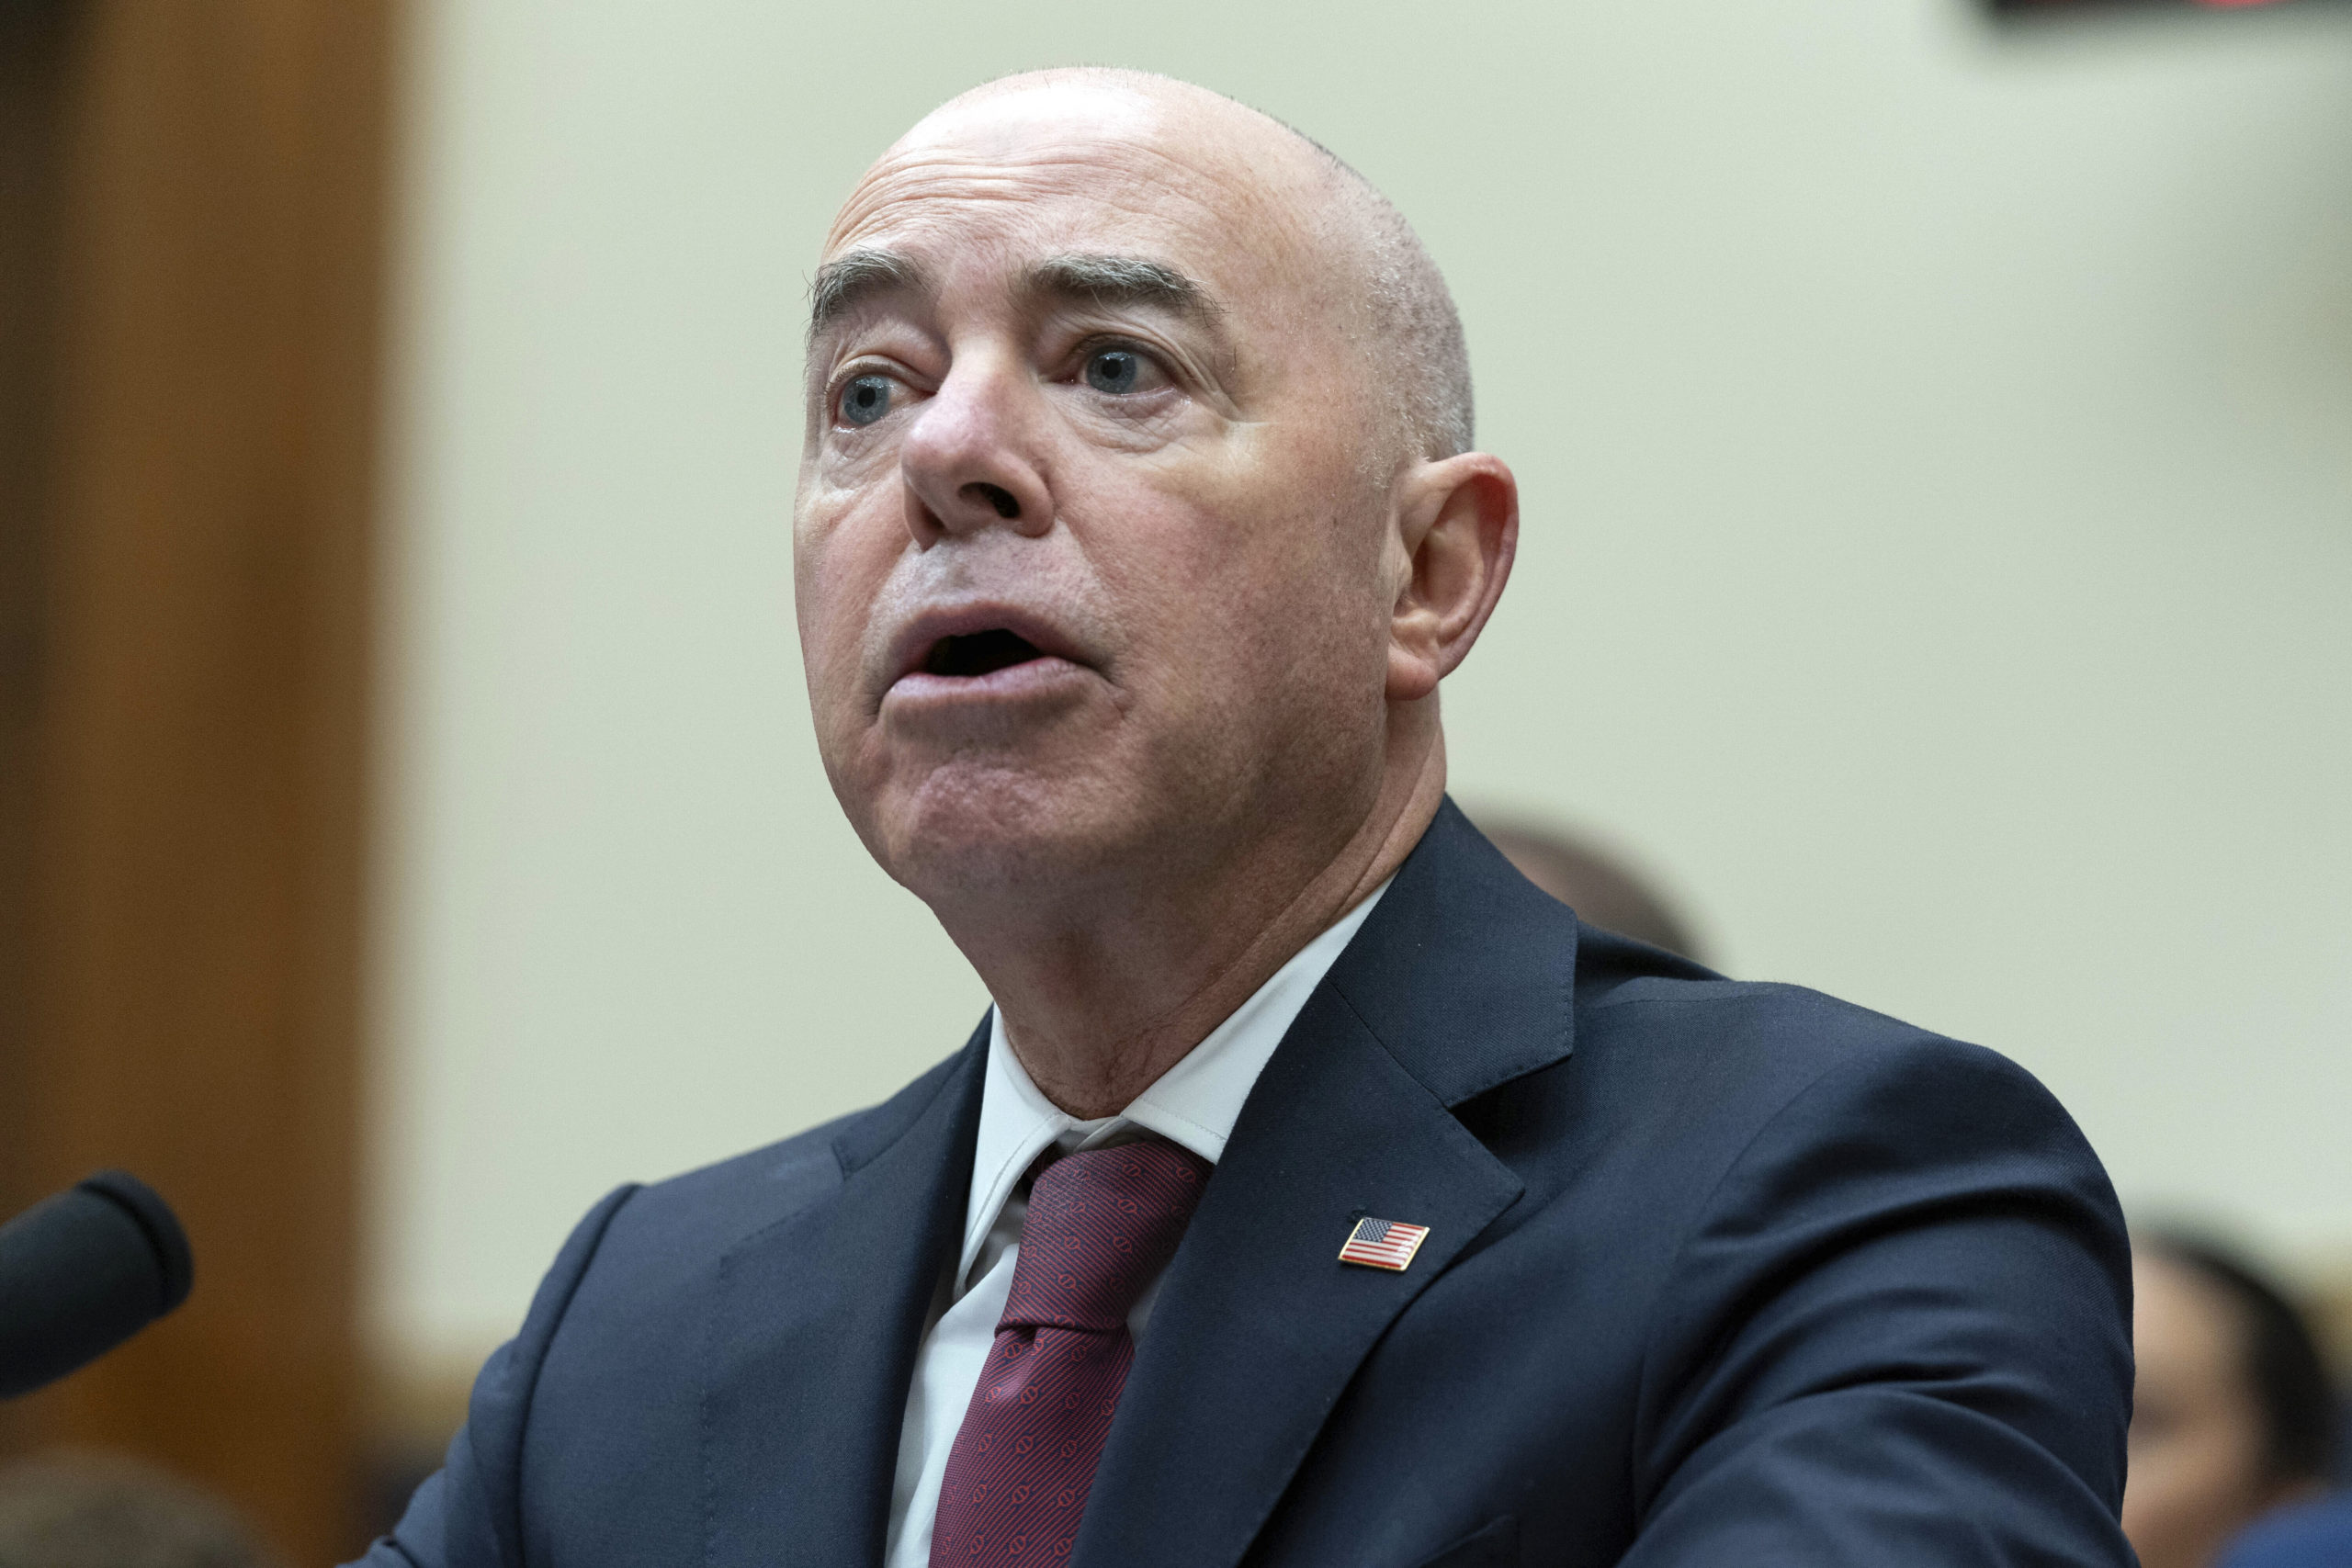 Homeland Security Secretary Alejandro Mayorkas testifies before the House Judiciary Committee hearing on Oversight of the U.S. Department of Homeland Security on Capitol Hill in Washington, D.C., on Wednesday.